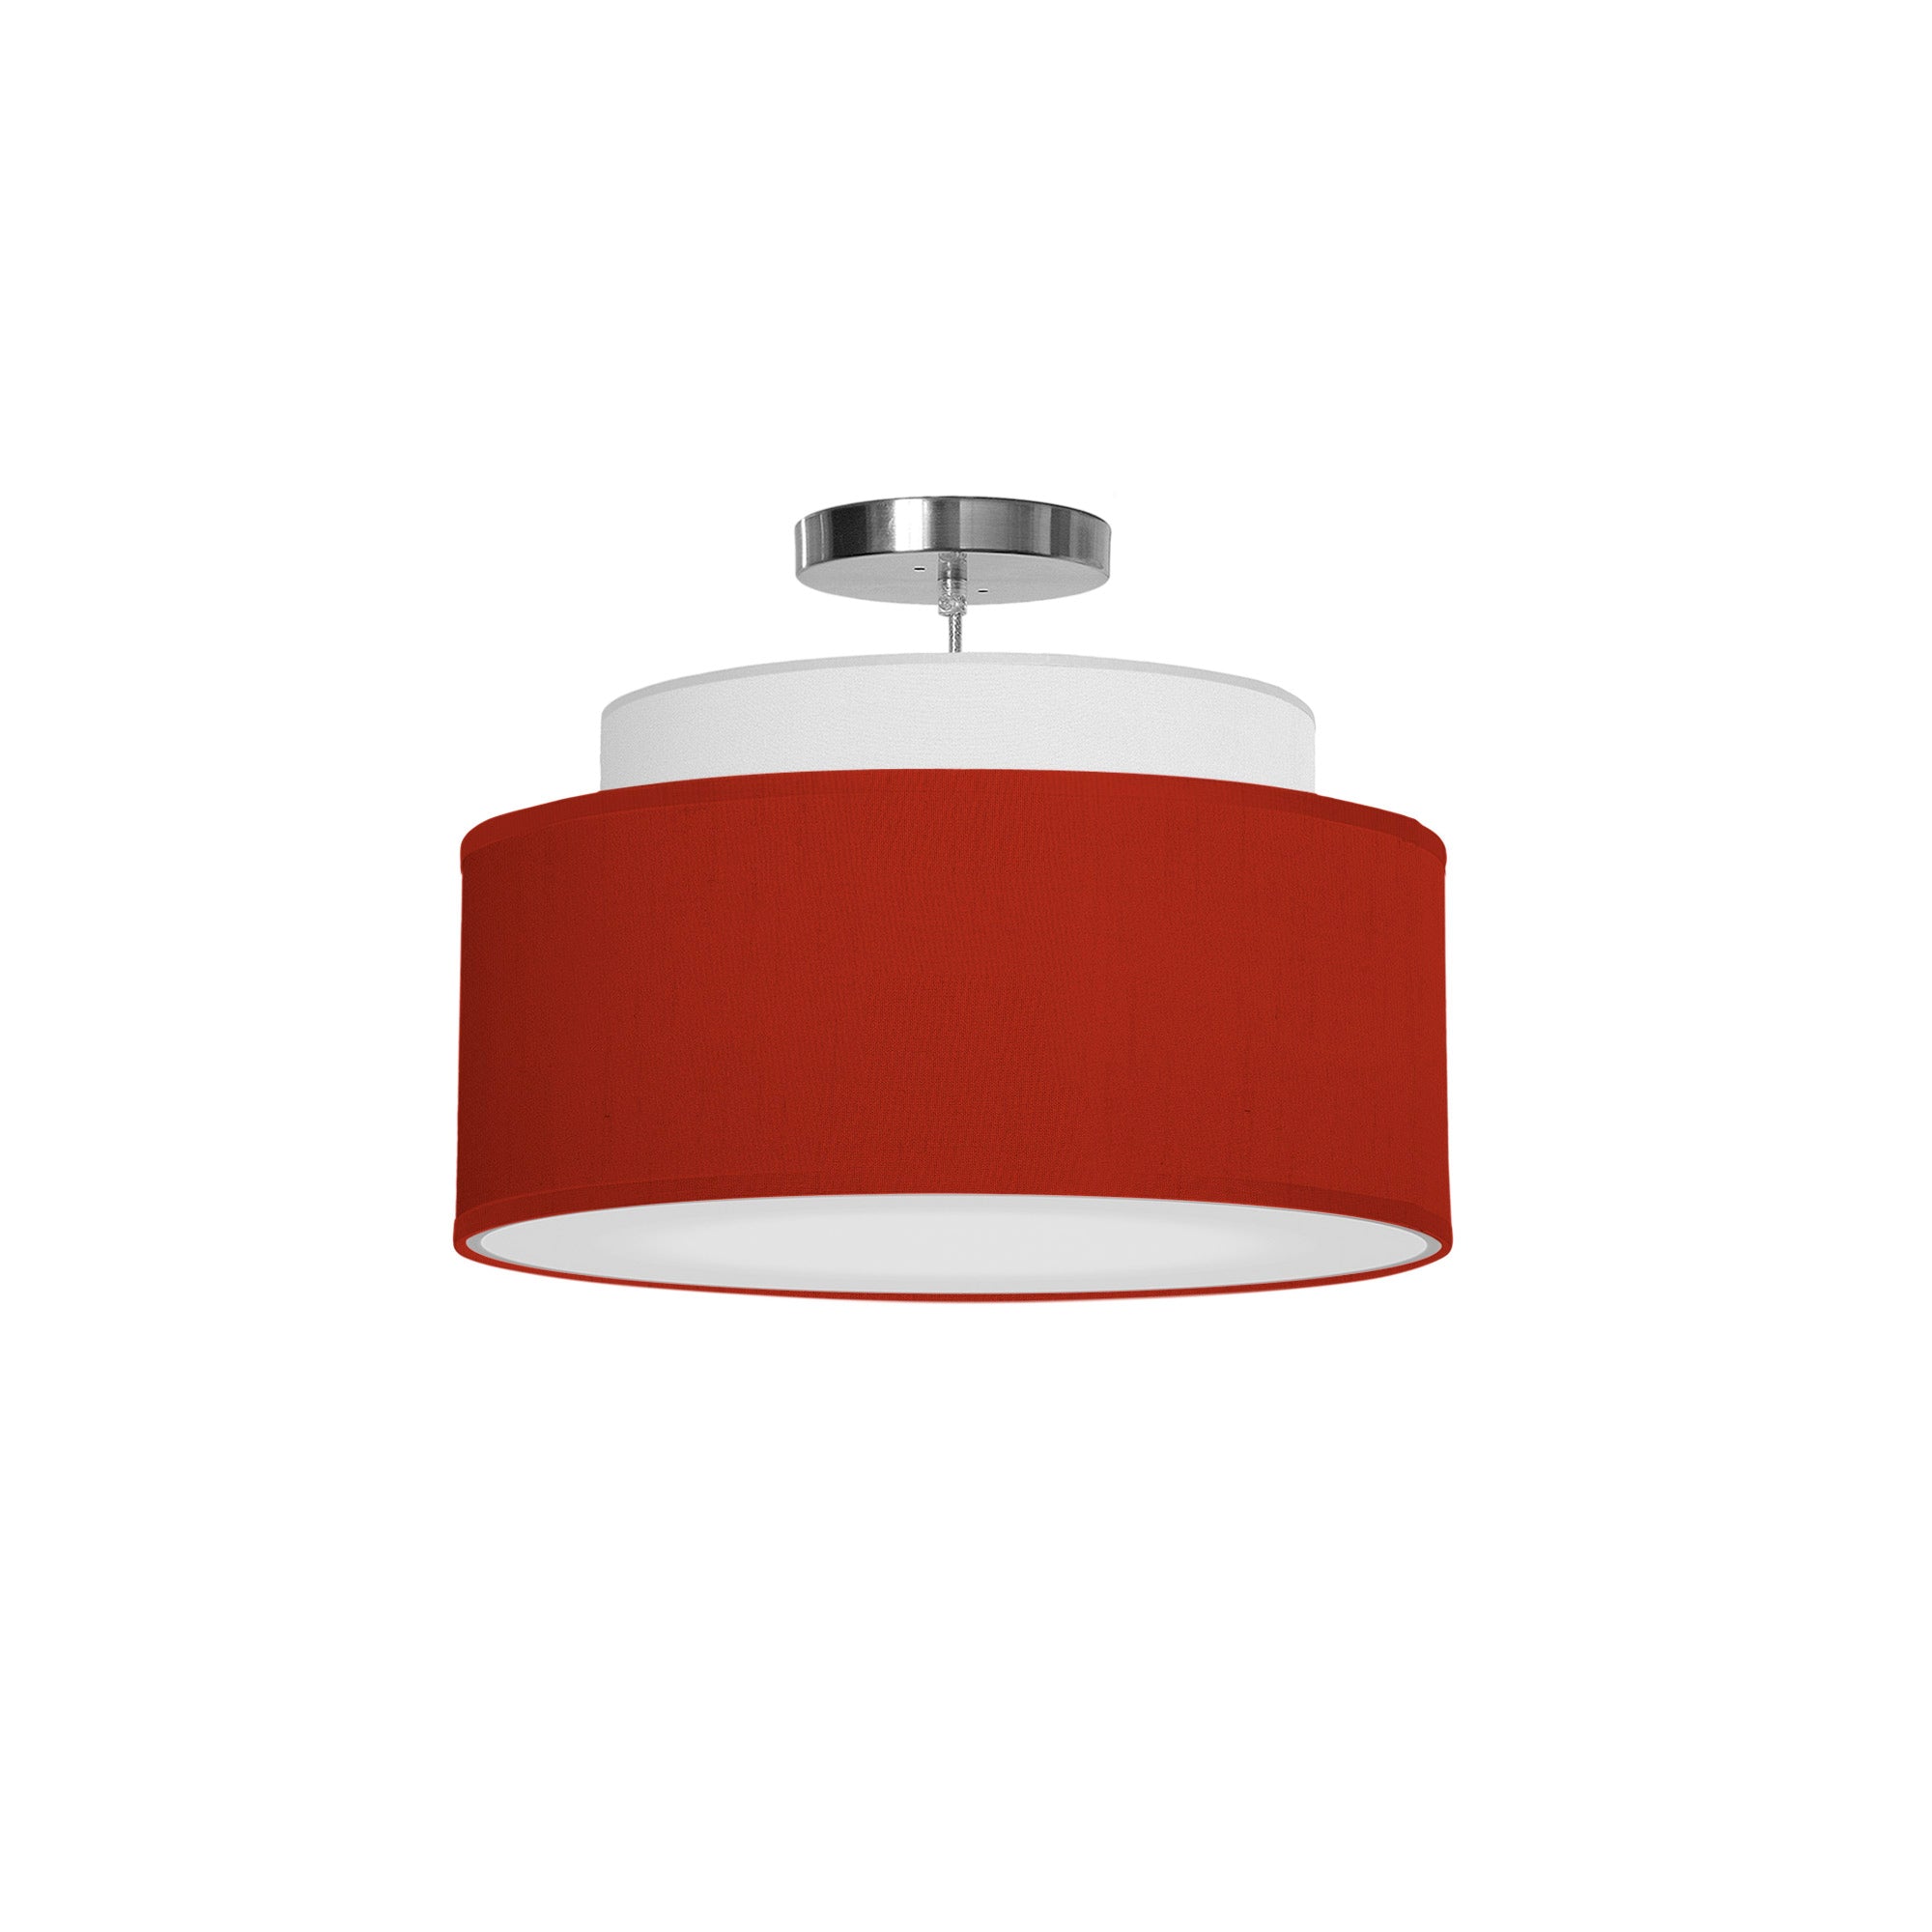 The Elsa Hanging Lamp from Seascape Fixtures with a silk shade in red color.